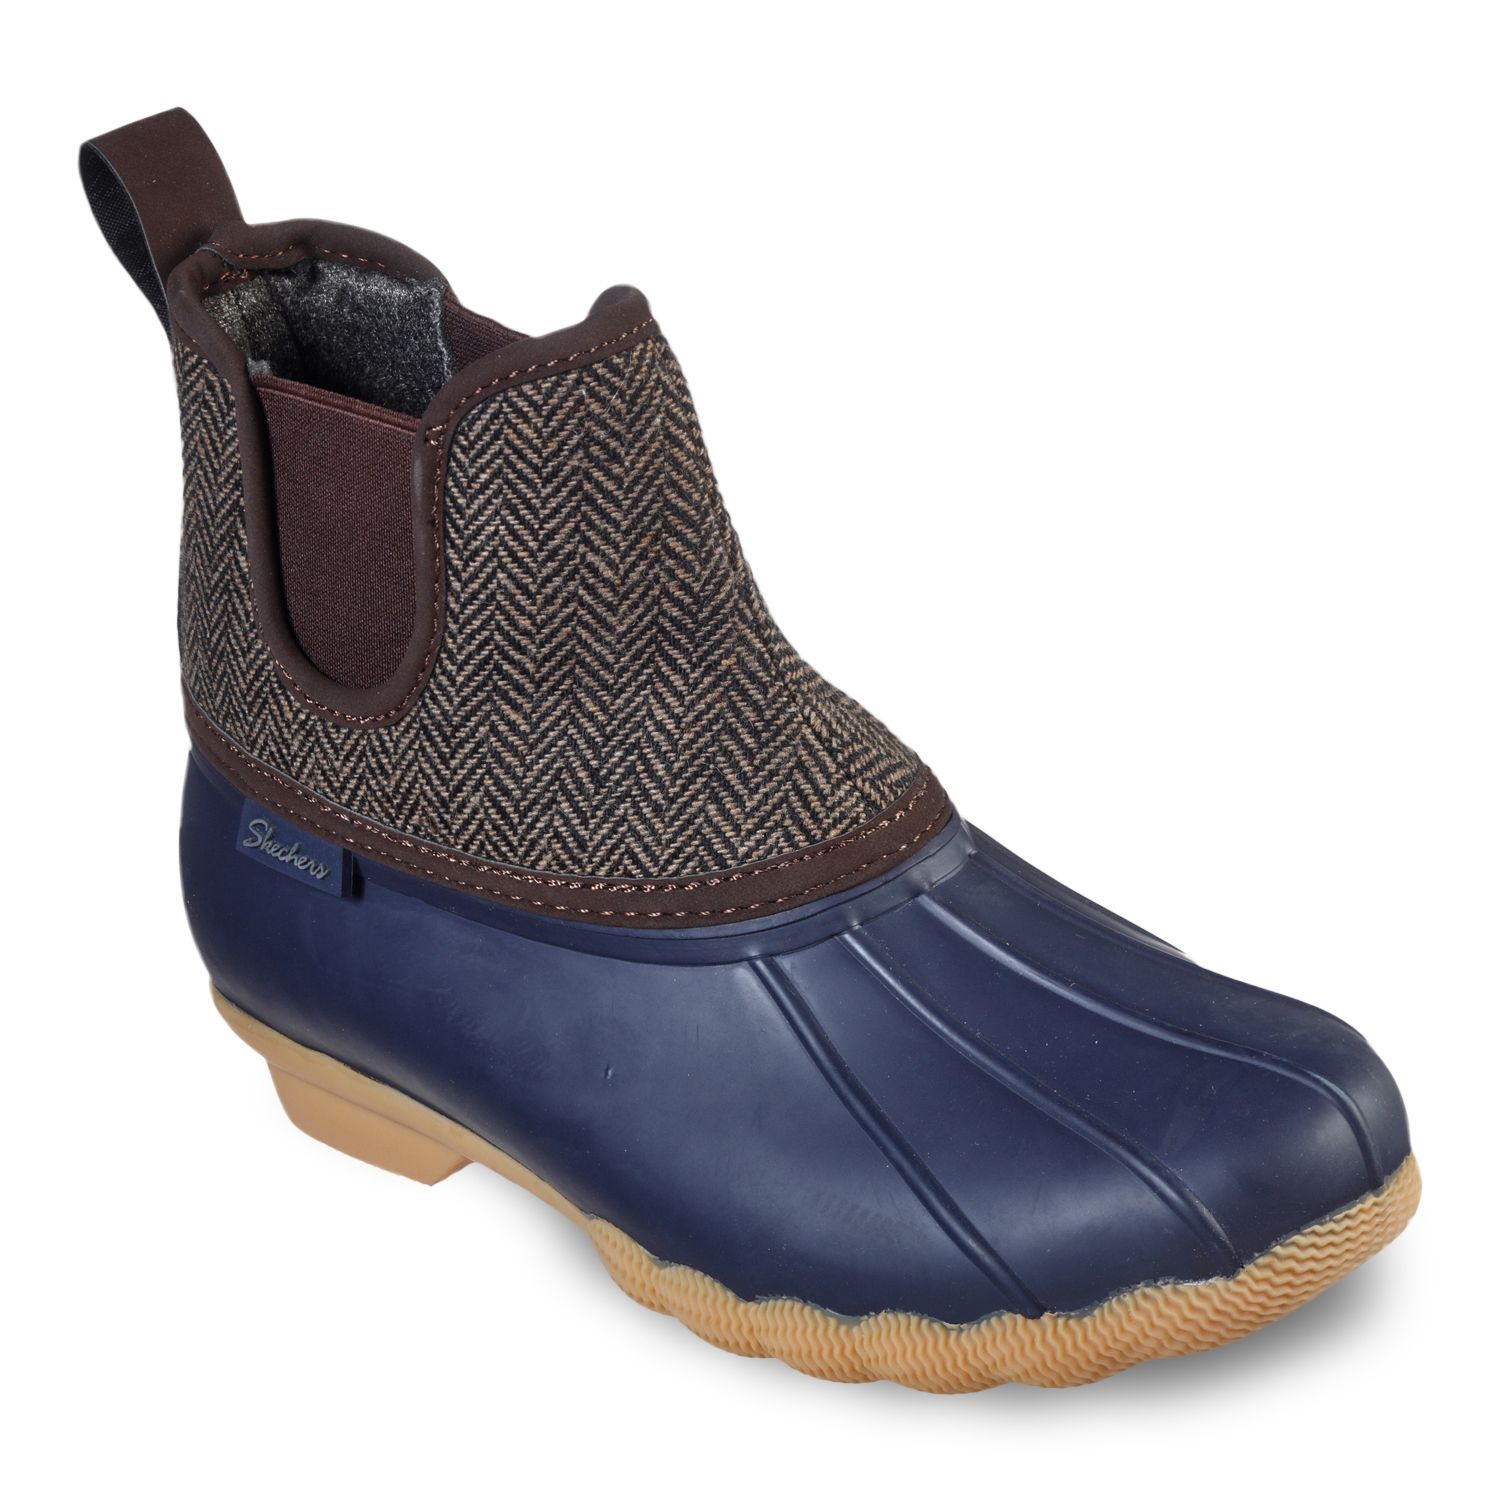 Pond Staying Dry Women's Duck Boots